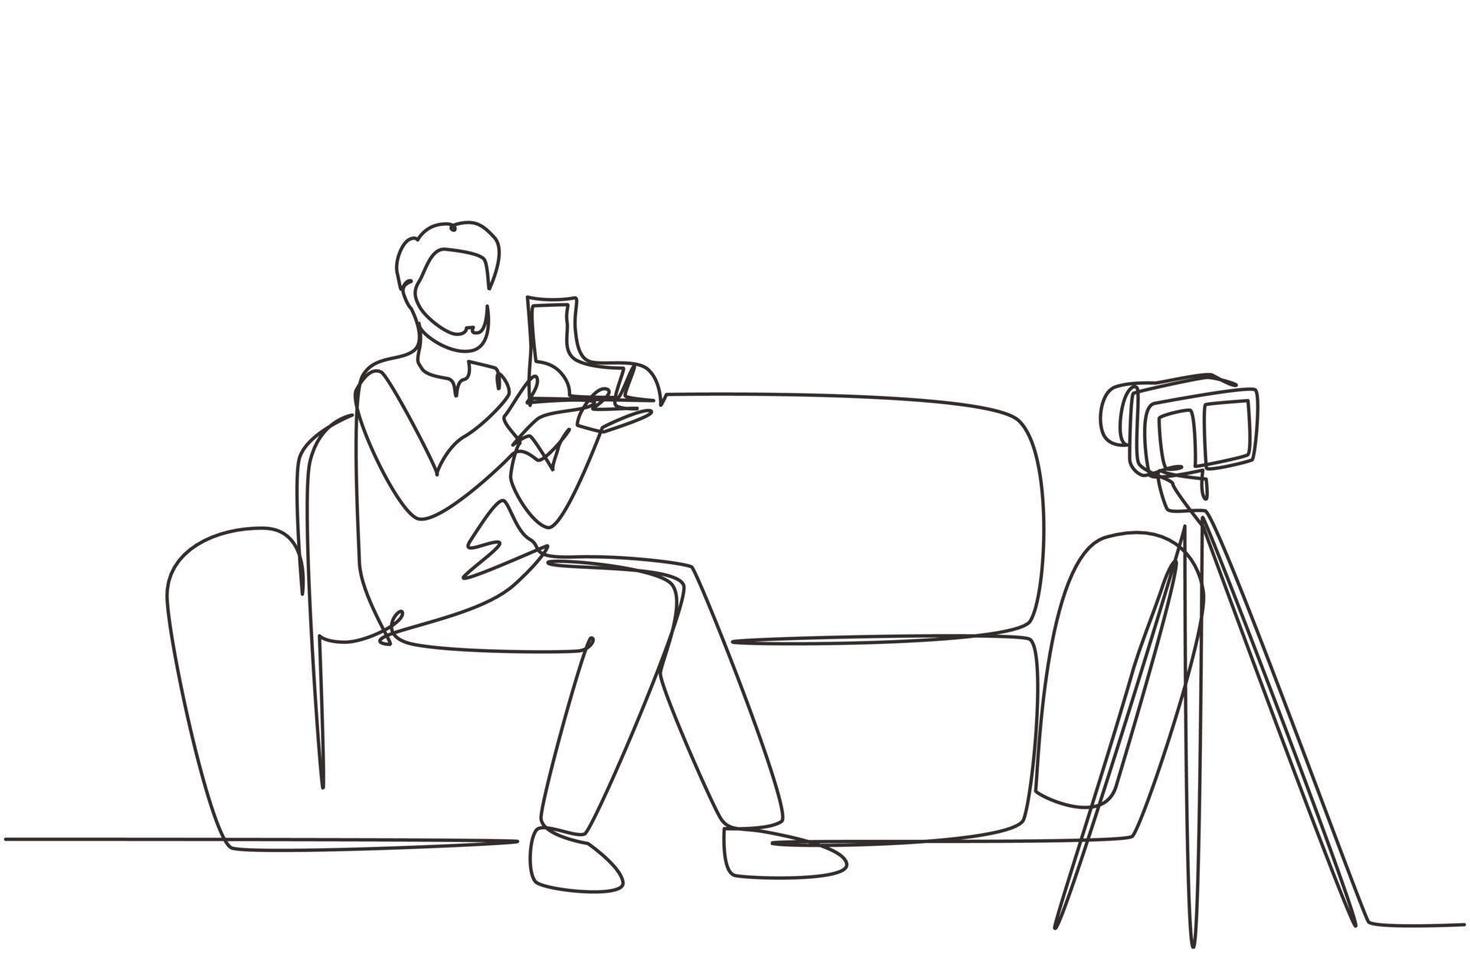 Single continuous line drawing social media influencer reviewing boots. Smiling young Arab man vlogging about men's sports shoe and filming himself at home on video camera. One line draw design vector